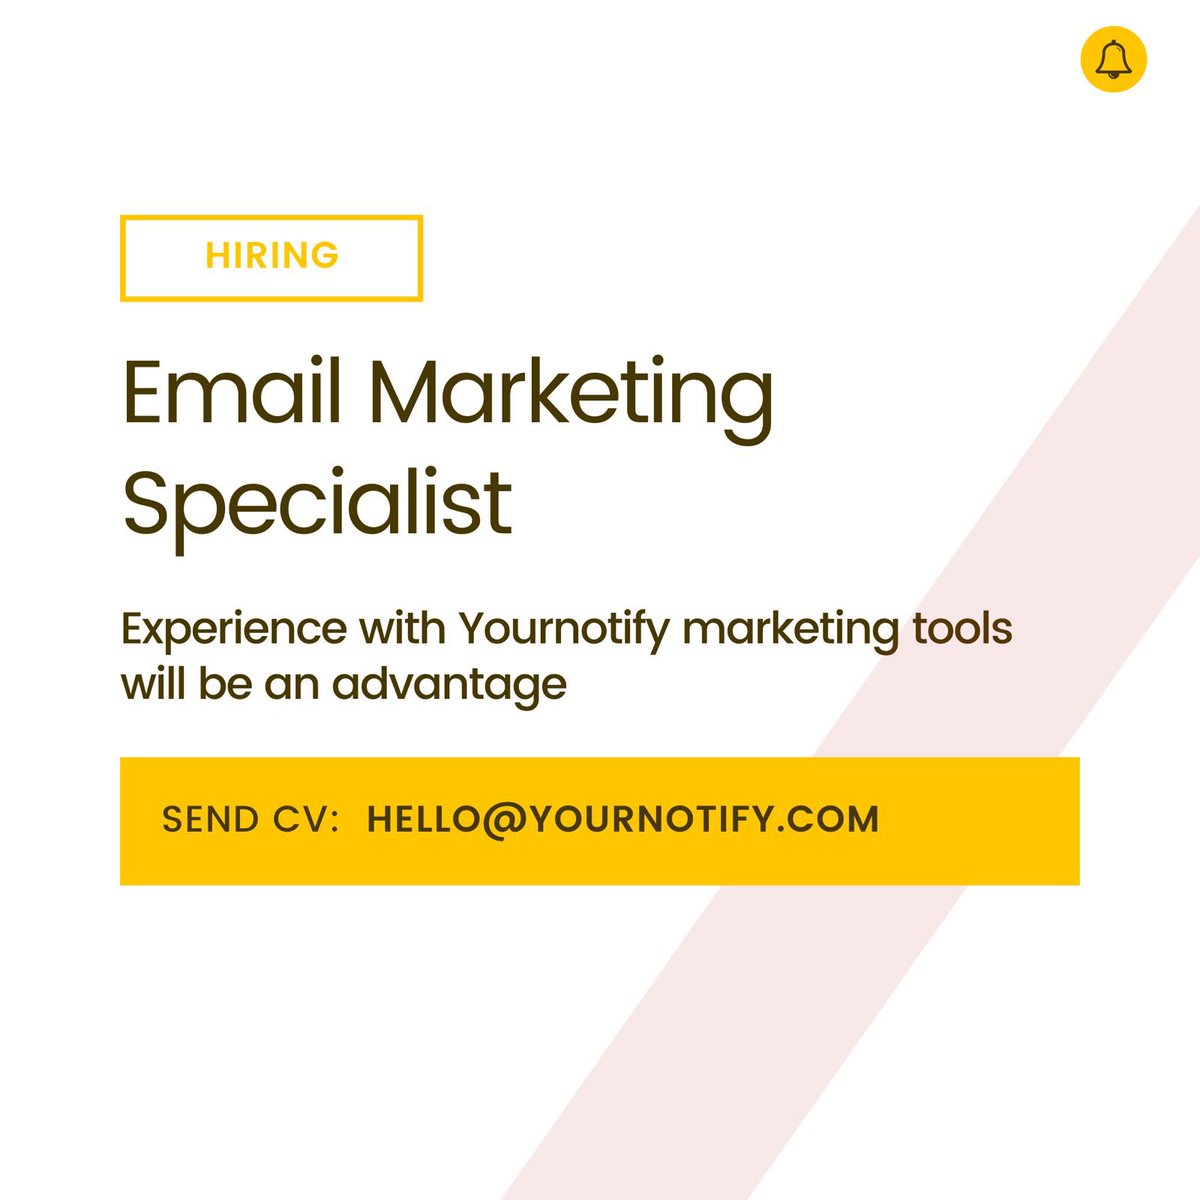 One of our customer @yournotify is looking for email marketing specialist to manage their campaigns * 2-3 years working experience in email marketing (email & sms) * Excellent content creation & writing skills * Working knowledge of how Yournotify works will be an advantage